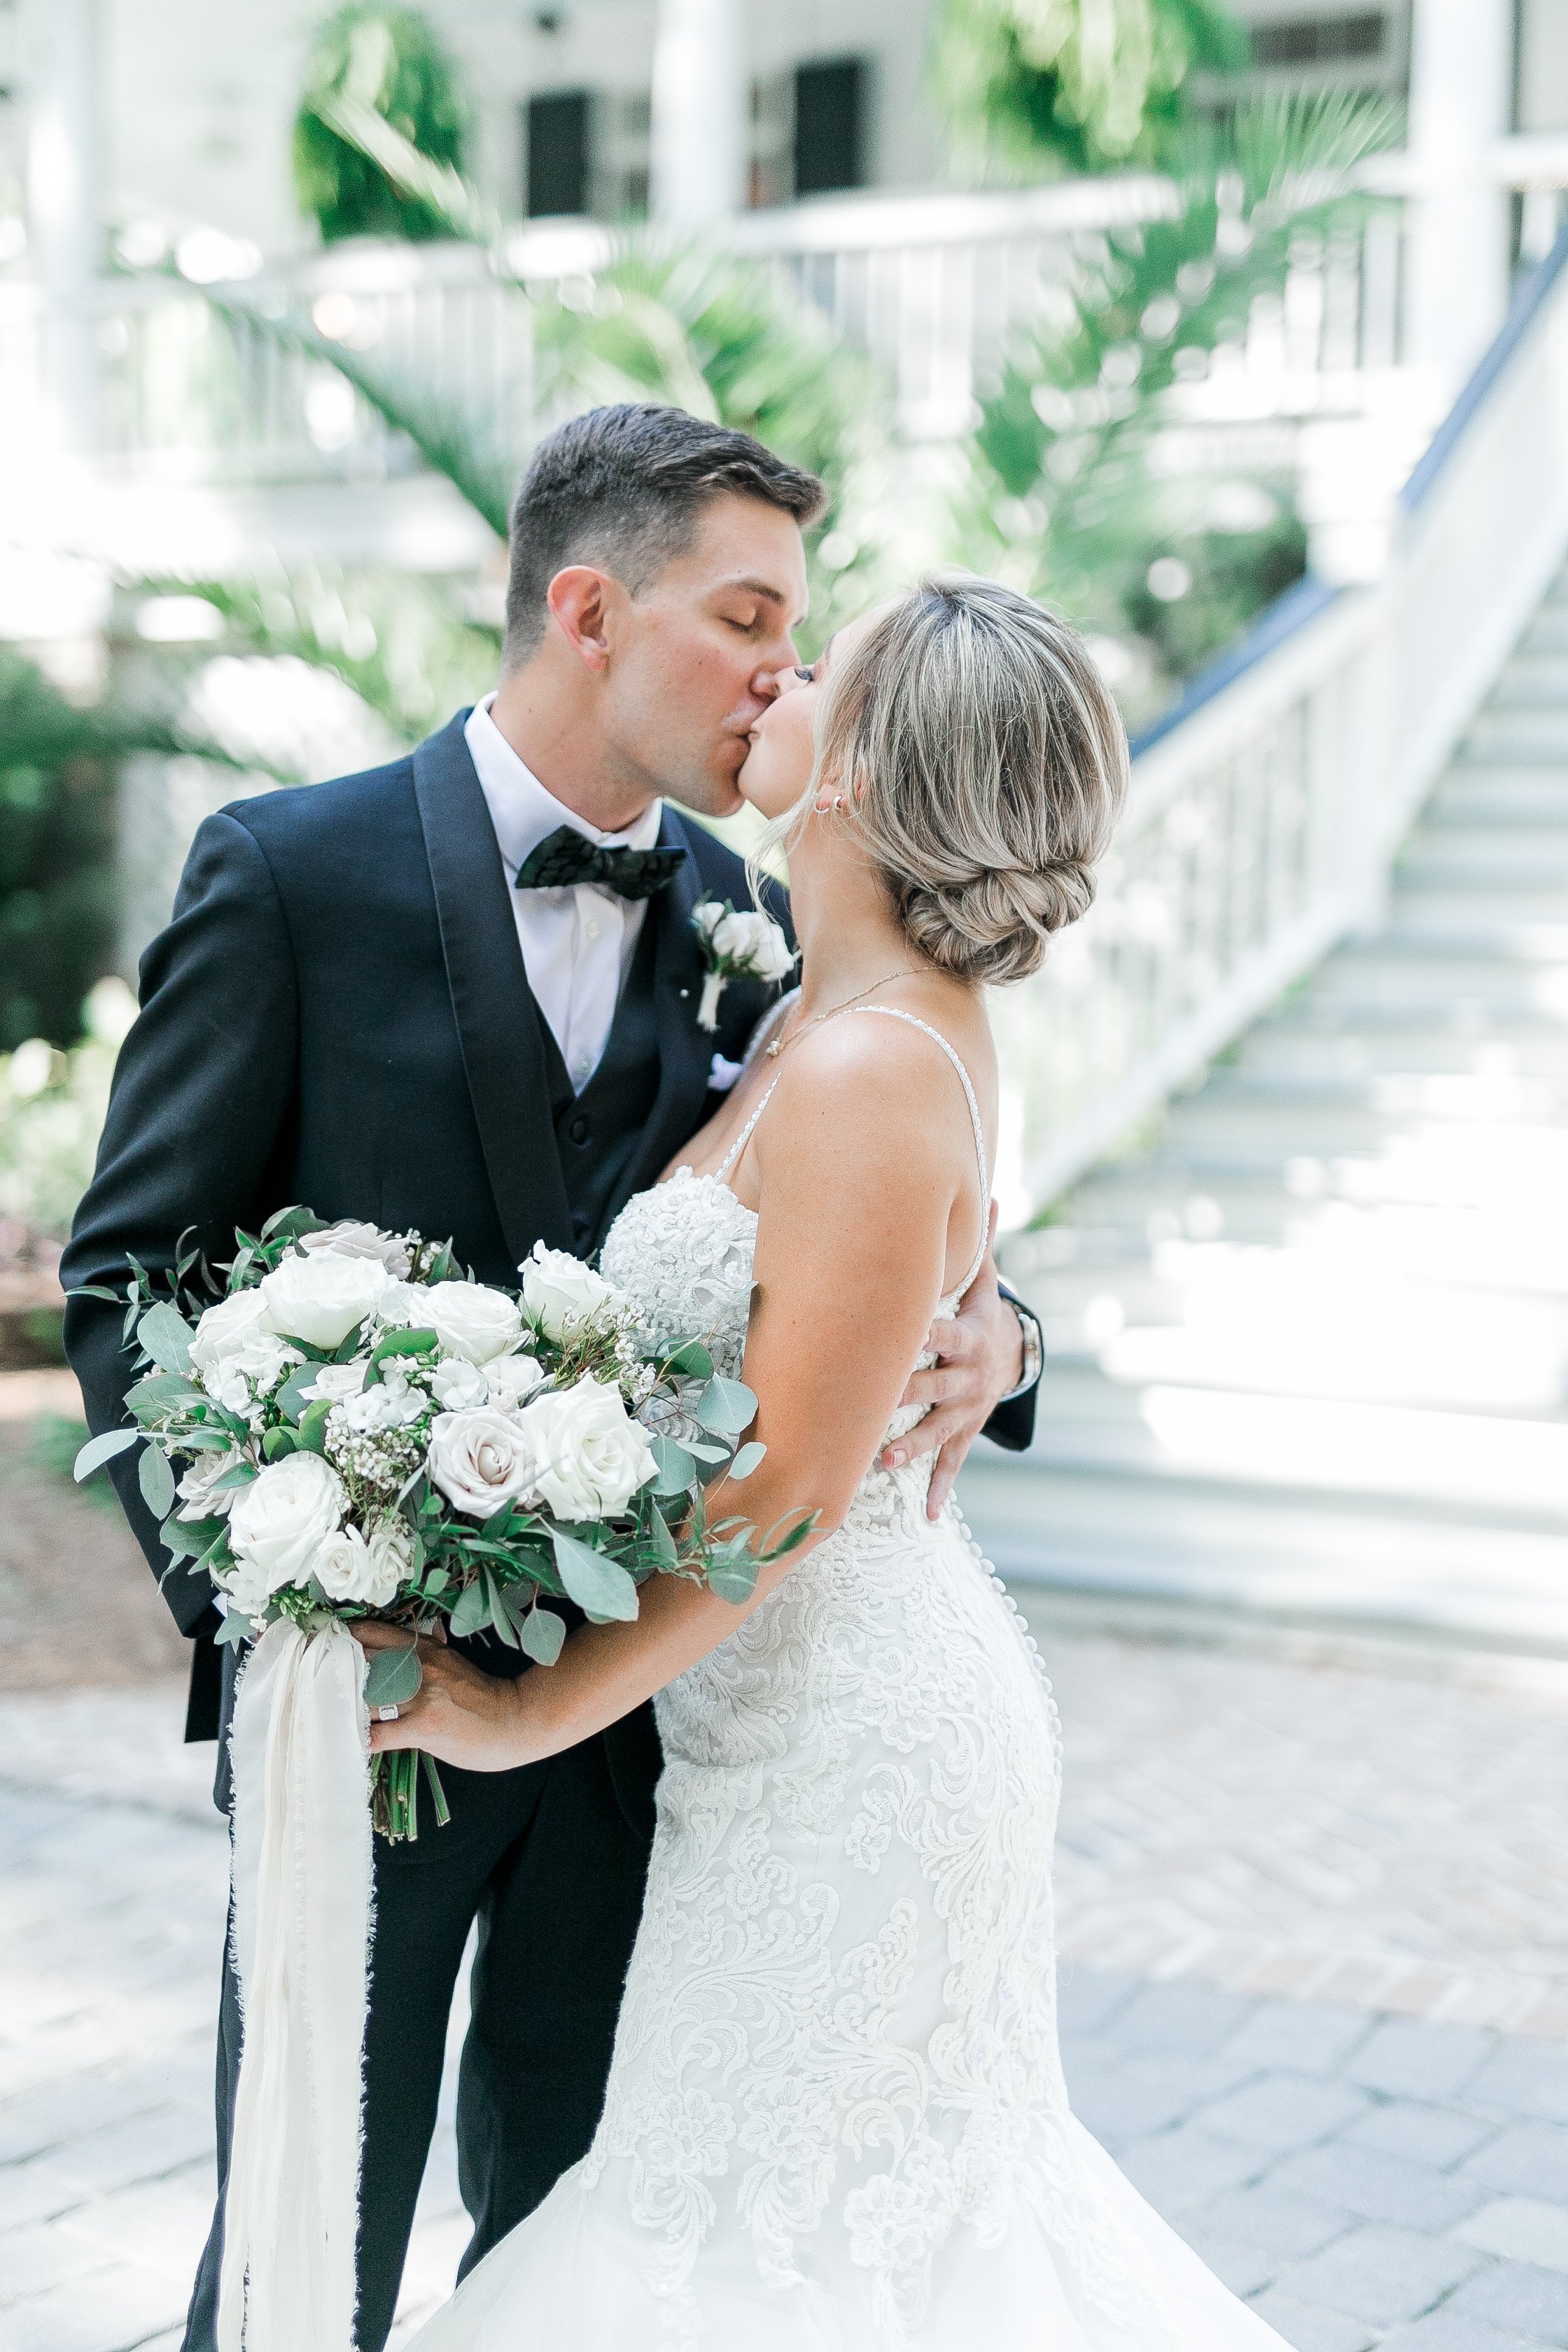 ivory-and-beau-bride-and-florals-wedding-blog-real-bride-real-wedding-savannah-wedding-southern-wedding-mackey-house-alistaire-maggie-sottero-wedding-dress-organic-natural-neutral-wedding-flowers-wedding-florist-savannah-Oct32021Wedding2143.JPG